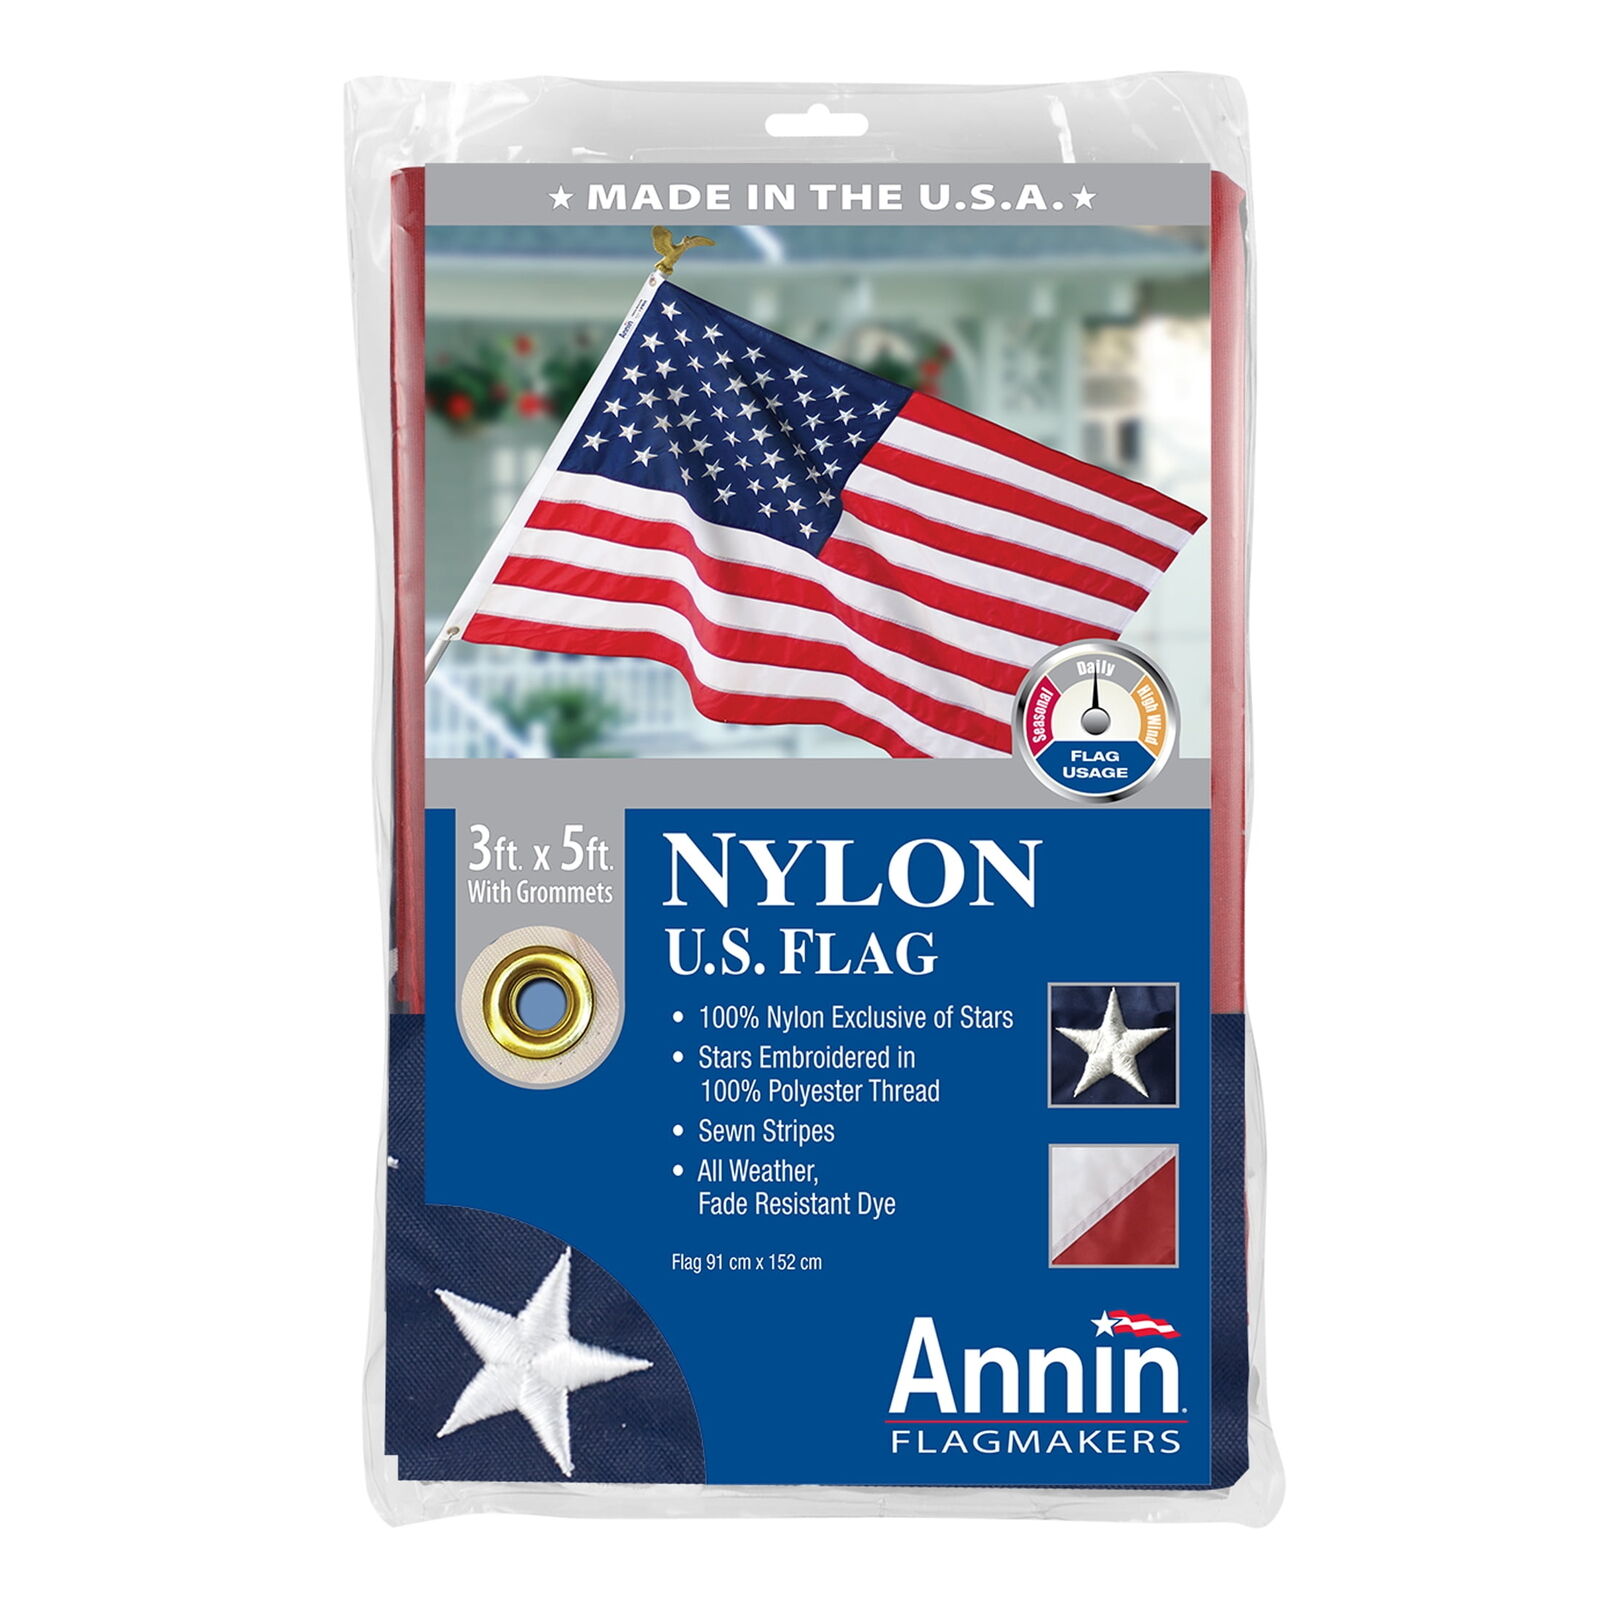 Nylon Flag with Sewn Stripes and Embroidered Stars by Annin, 3’ x 5’